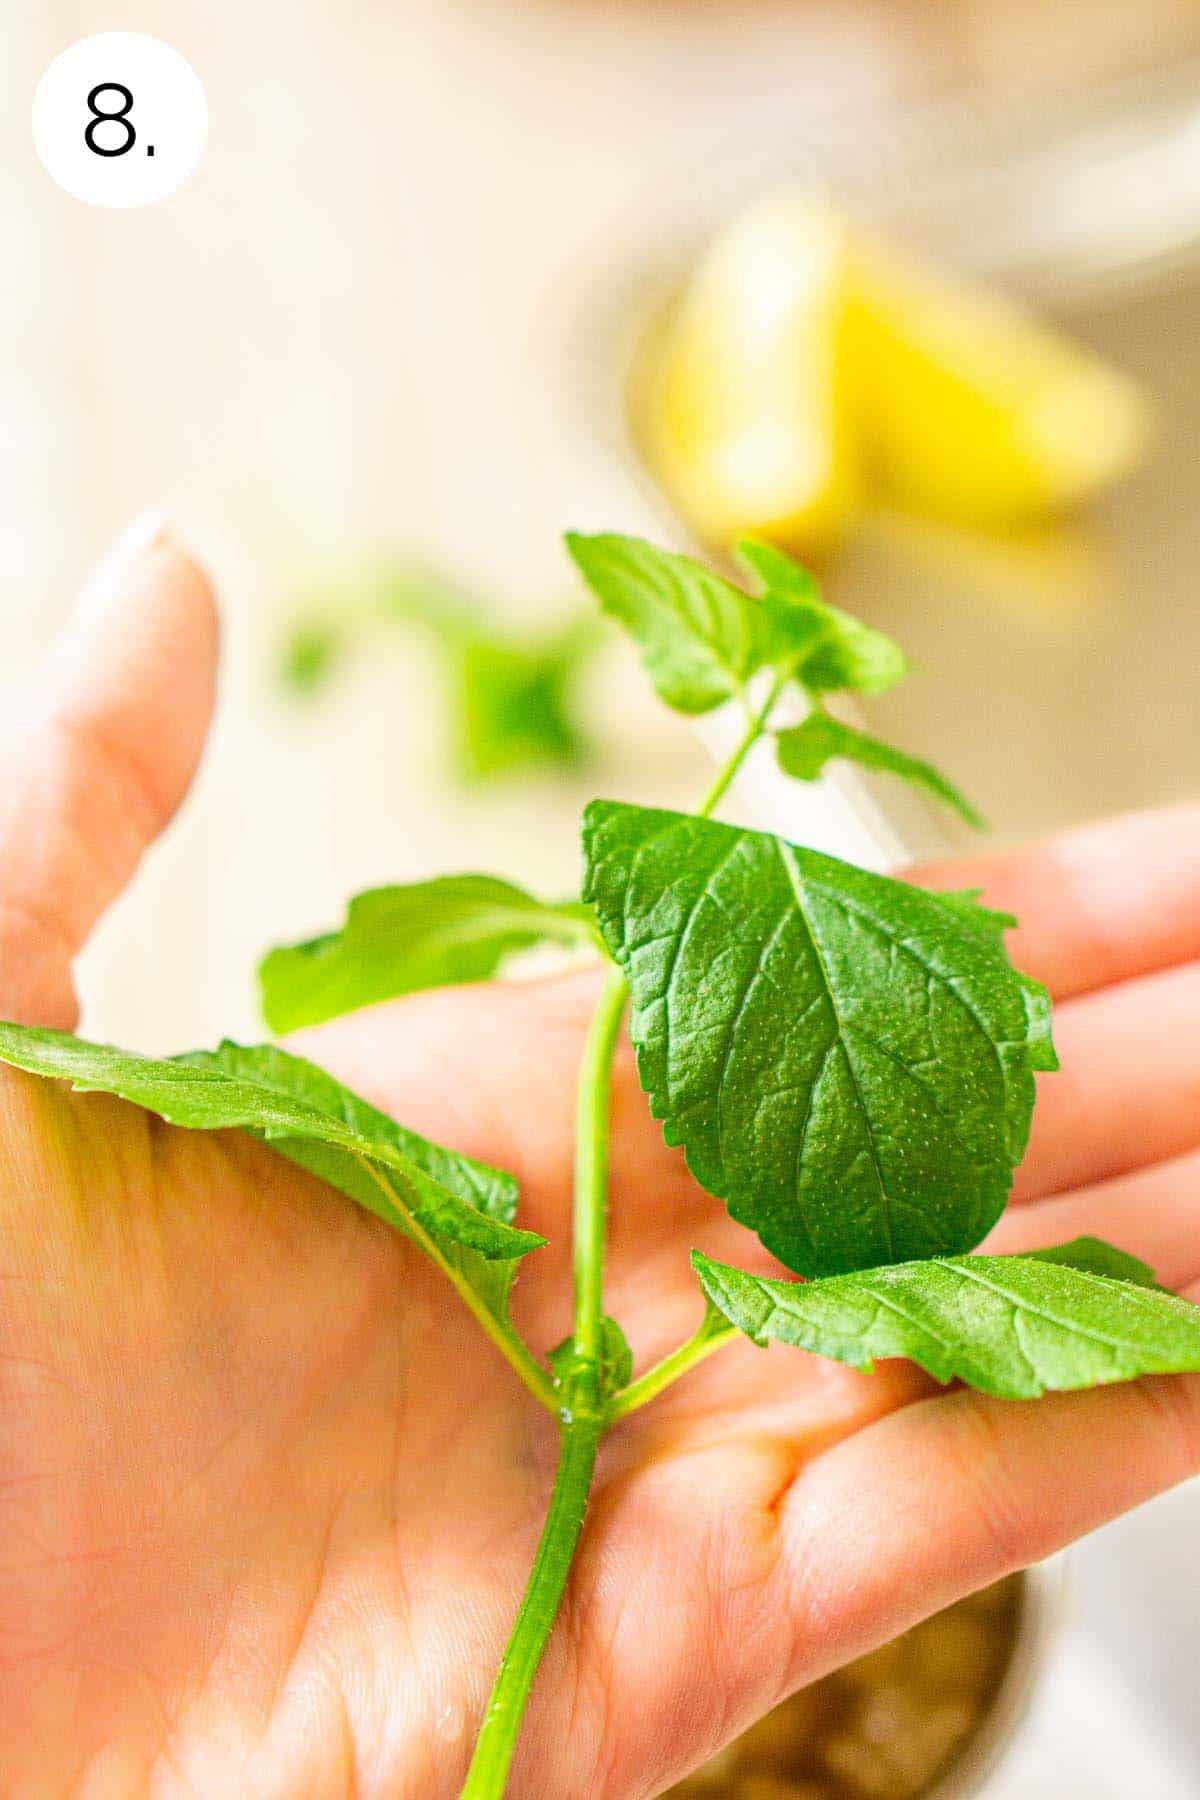 A fresh mint sprig in the palm of a hand before clapping and then garnishing.